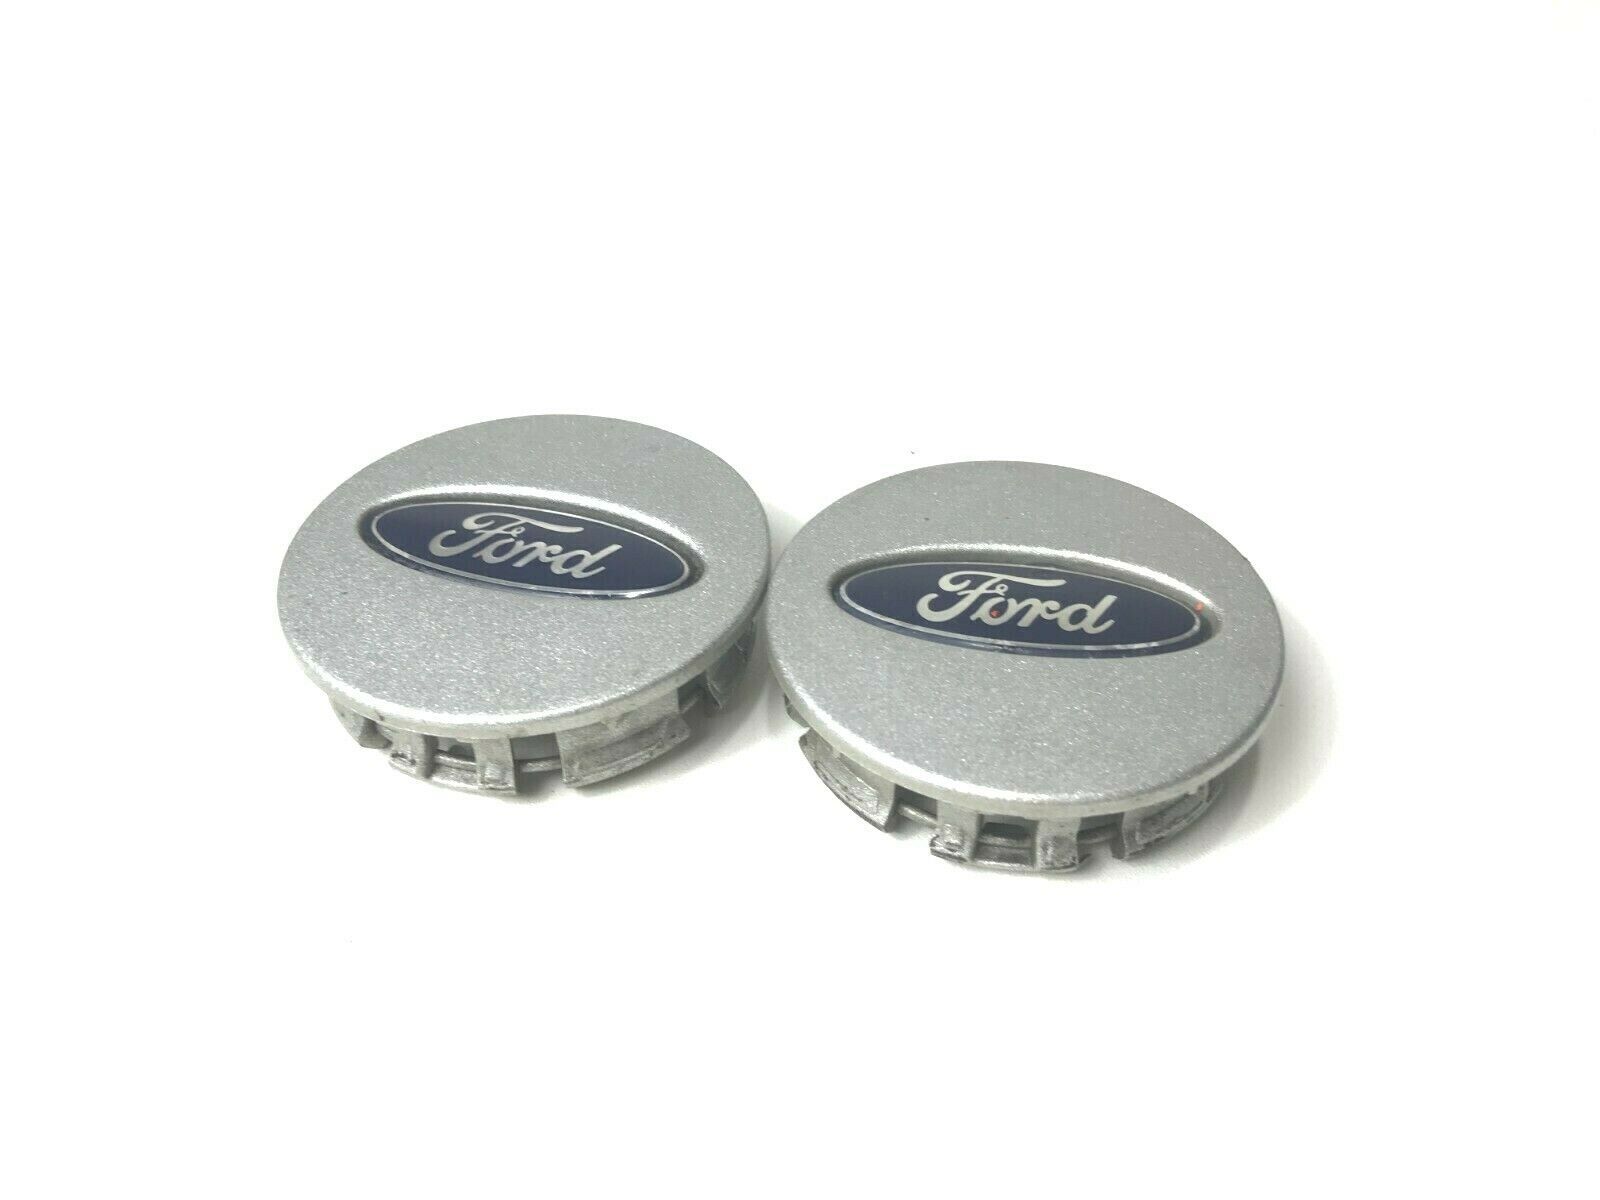 LOT OF 2*Ford Fusion Factory OEM Center Cap Wheel Cover Silver 6E5C-1A096-AB F14 - $9.49